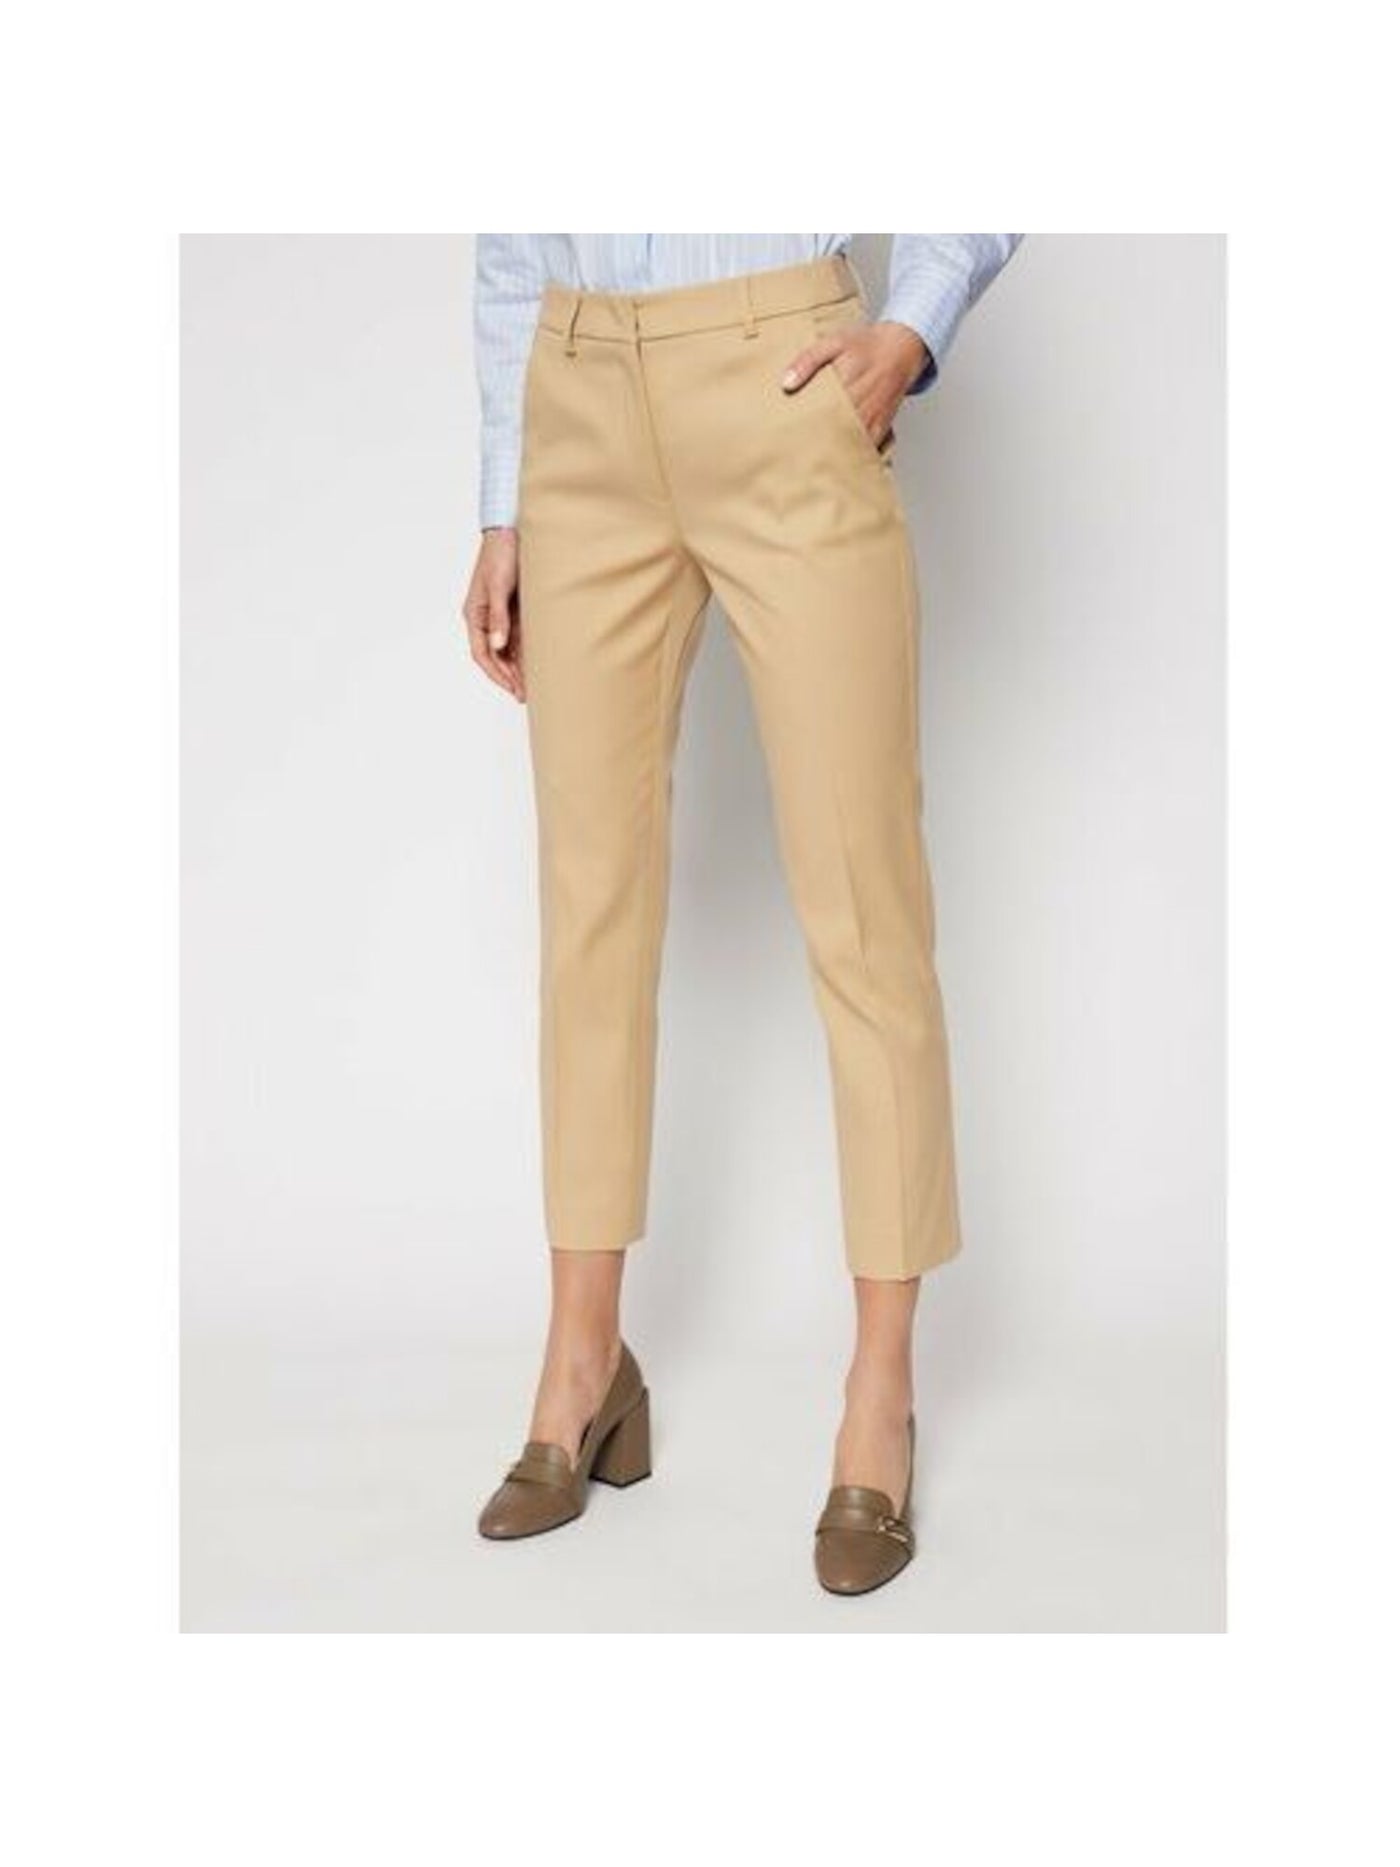 WEEKEND Womens Beige Pocketed Zippered Stretch Cropped Trousers Wear To Work Skinny Pants 10